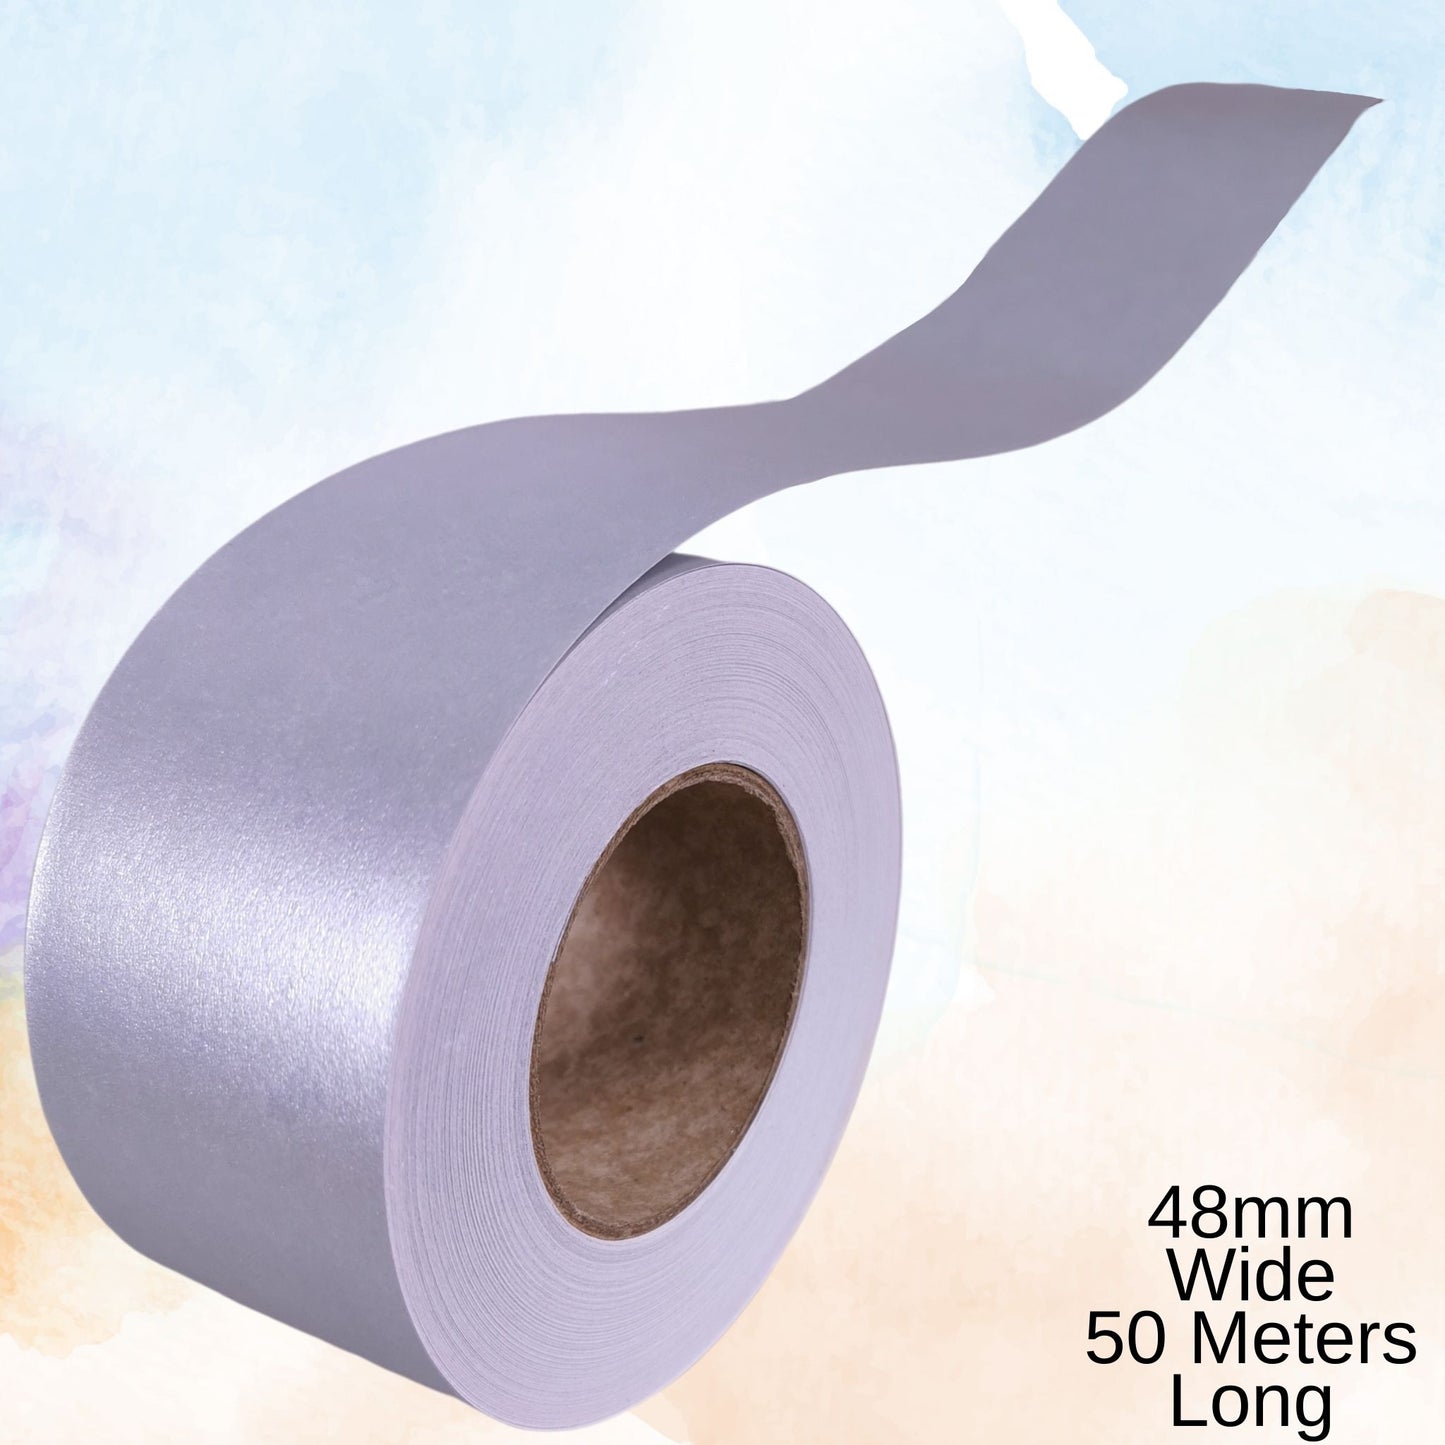 Straight Edge Border Roll 50m Display Borders For Walls, Display Boards & Classroom Decorations